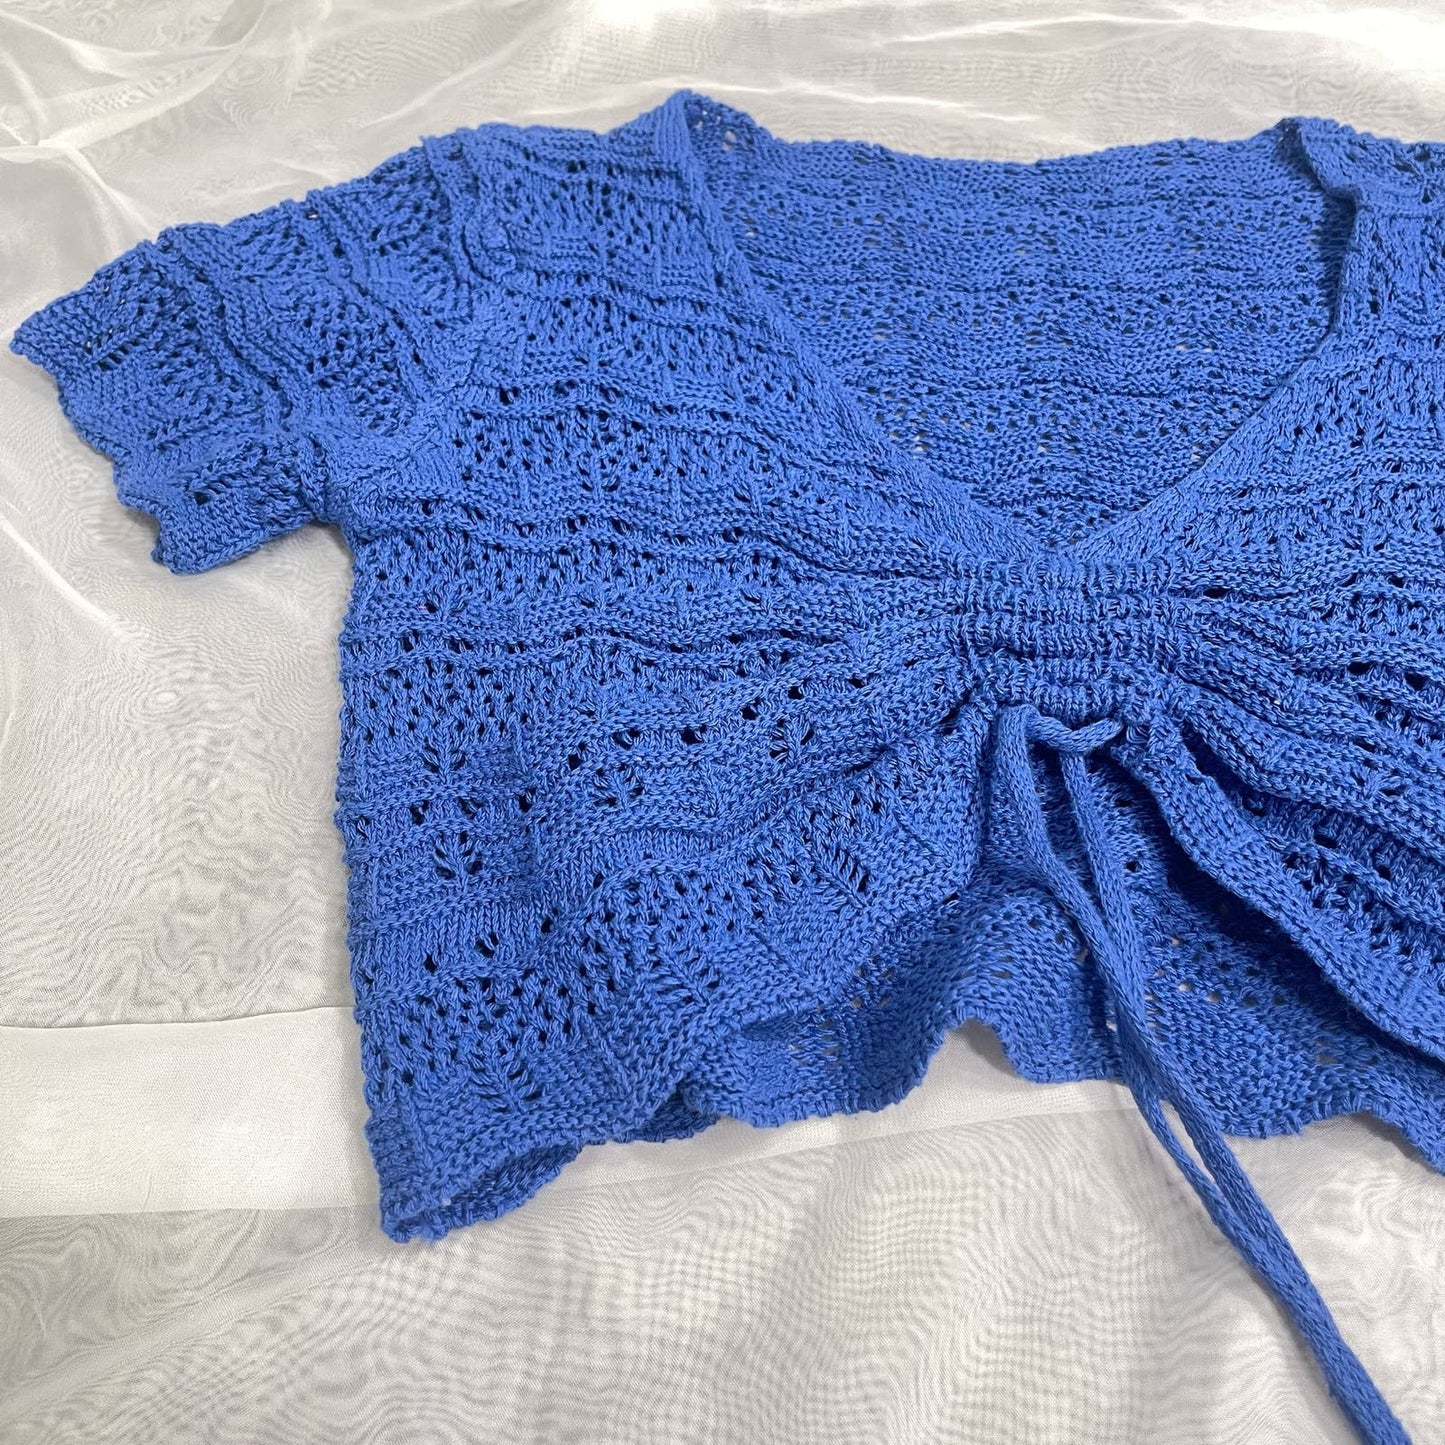 Made in Italy - Vintage 90s blue crochet (XS-M) Crop top 100% cotton Festival